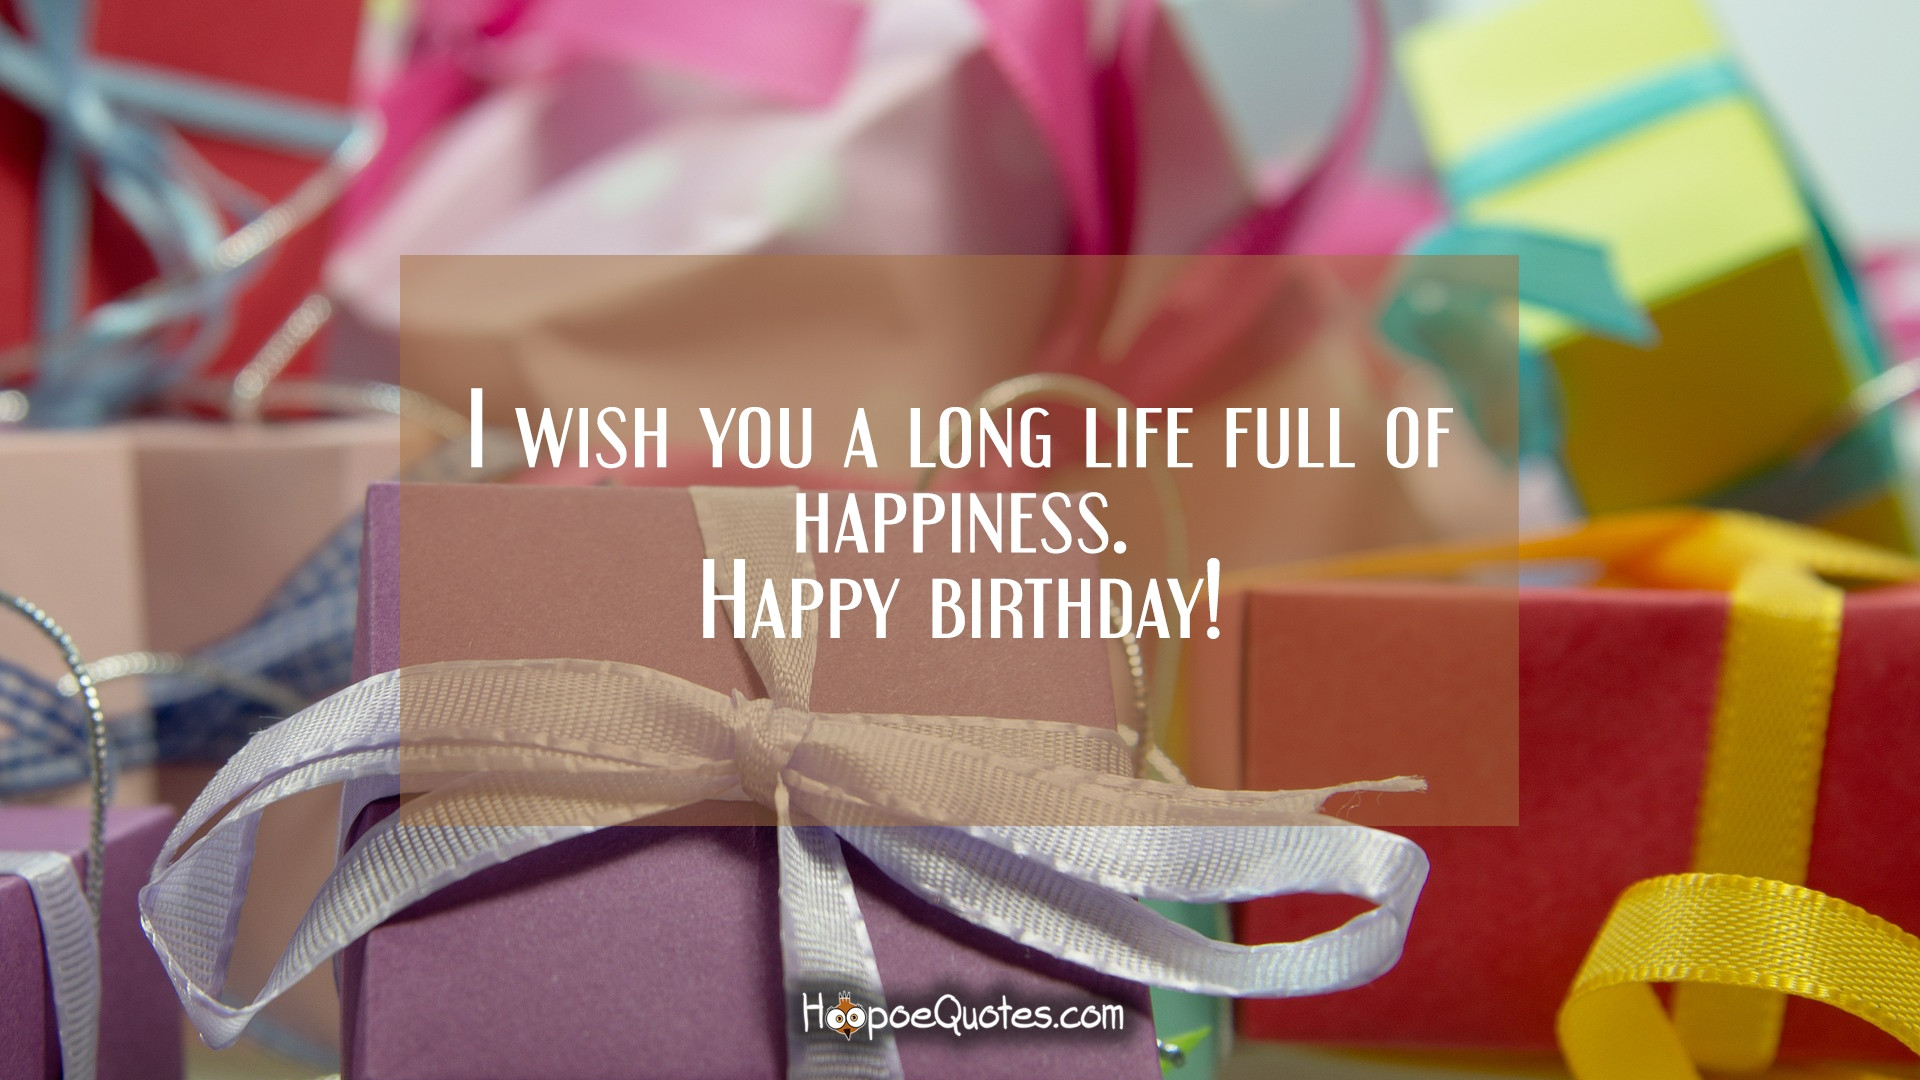 Wishing You A Happy Birthday Quotes
 I wish you a long life full of happiness Happy birthday